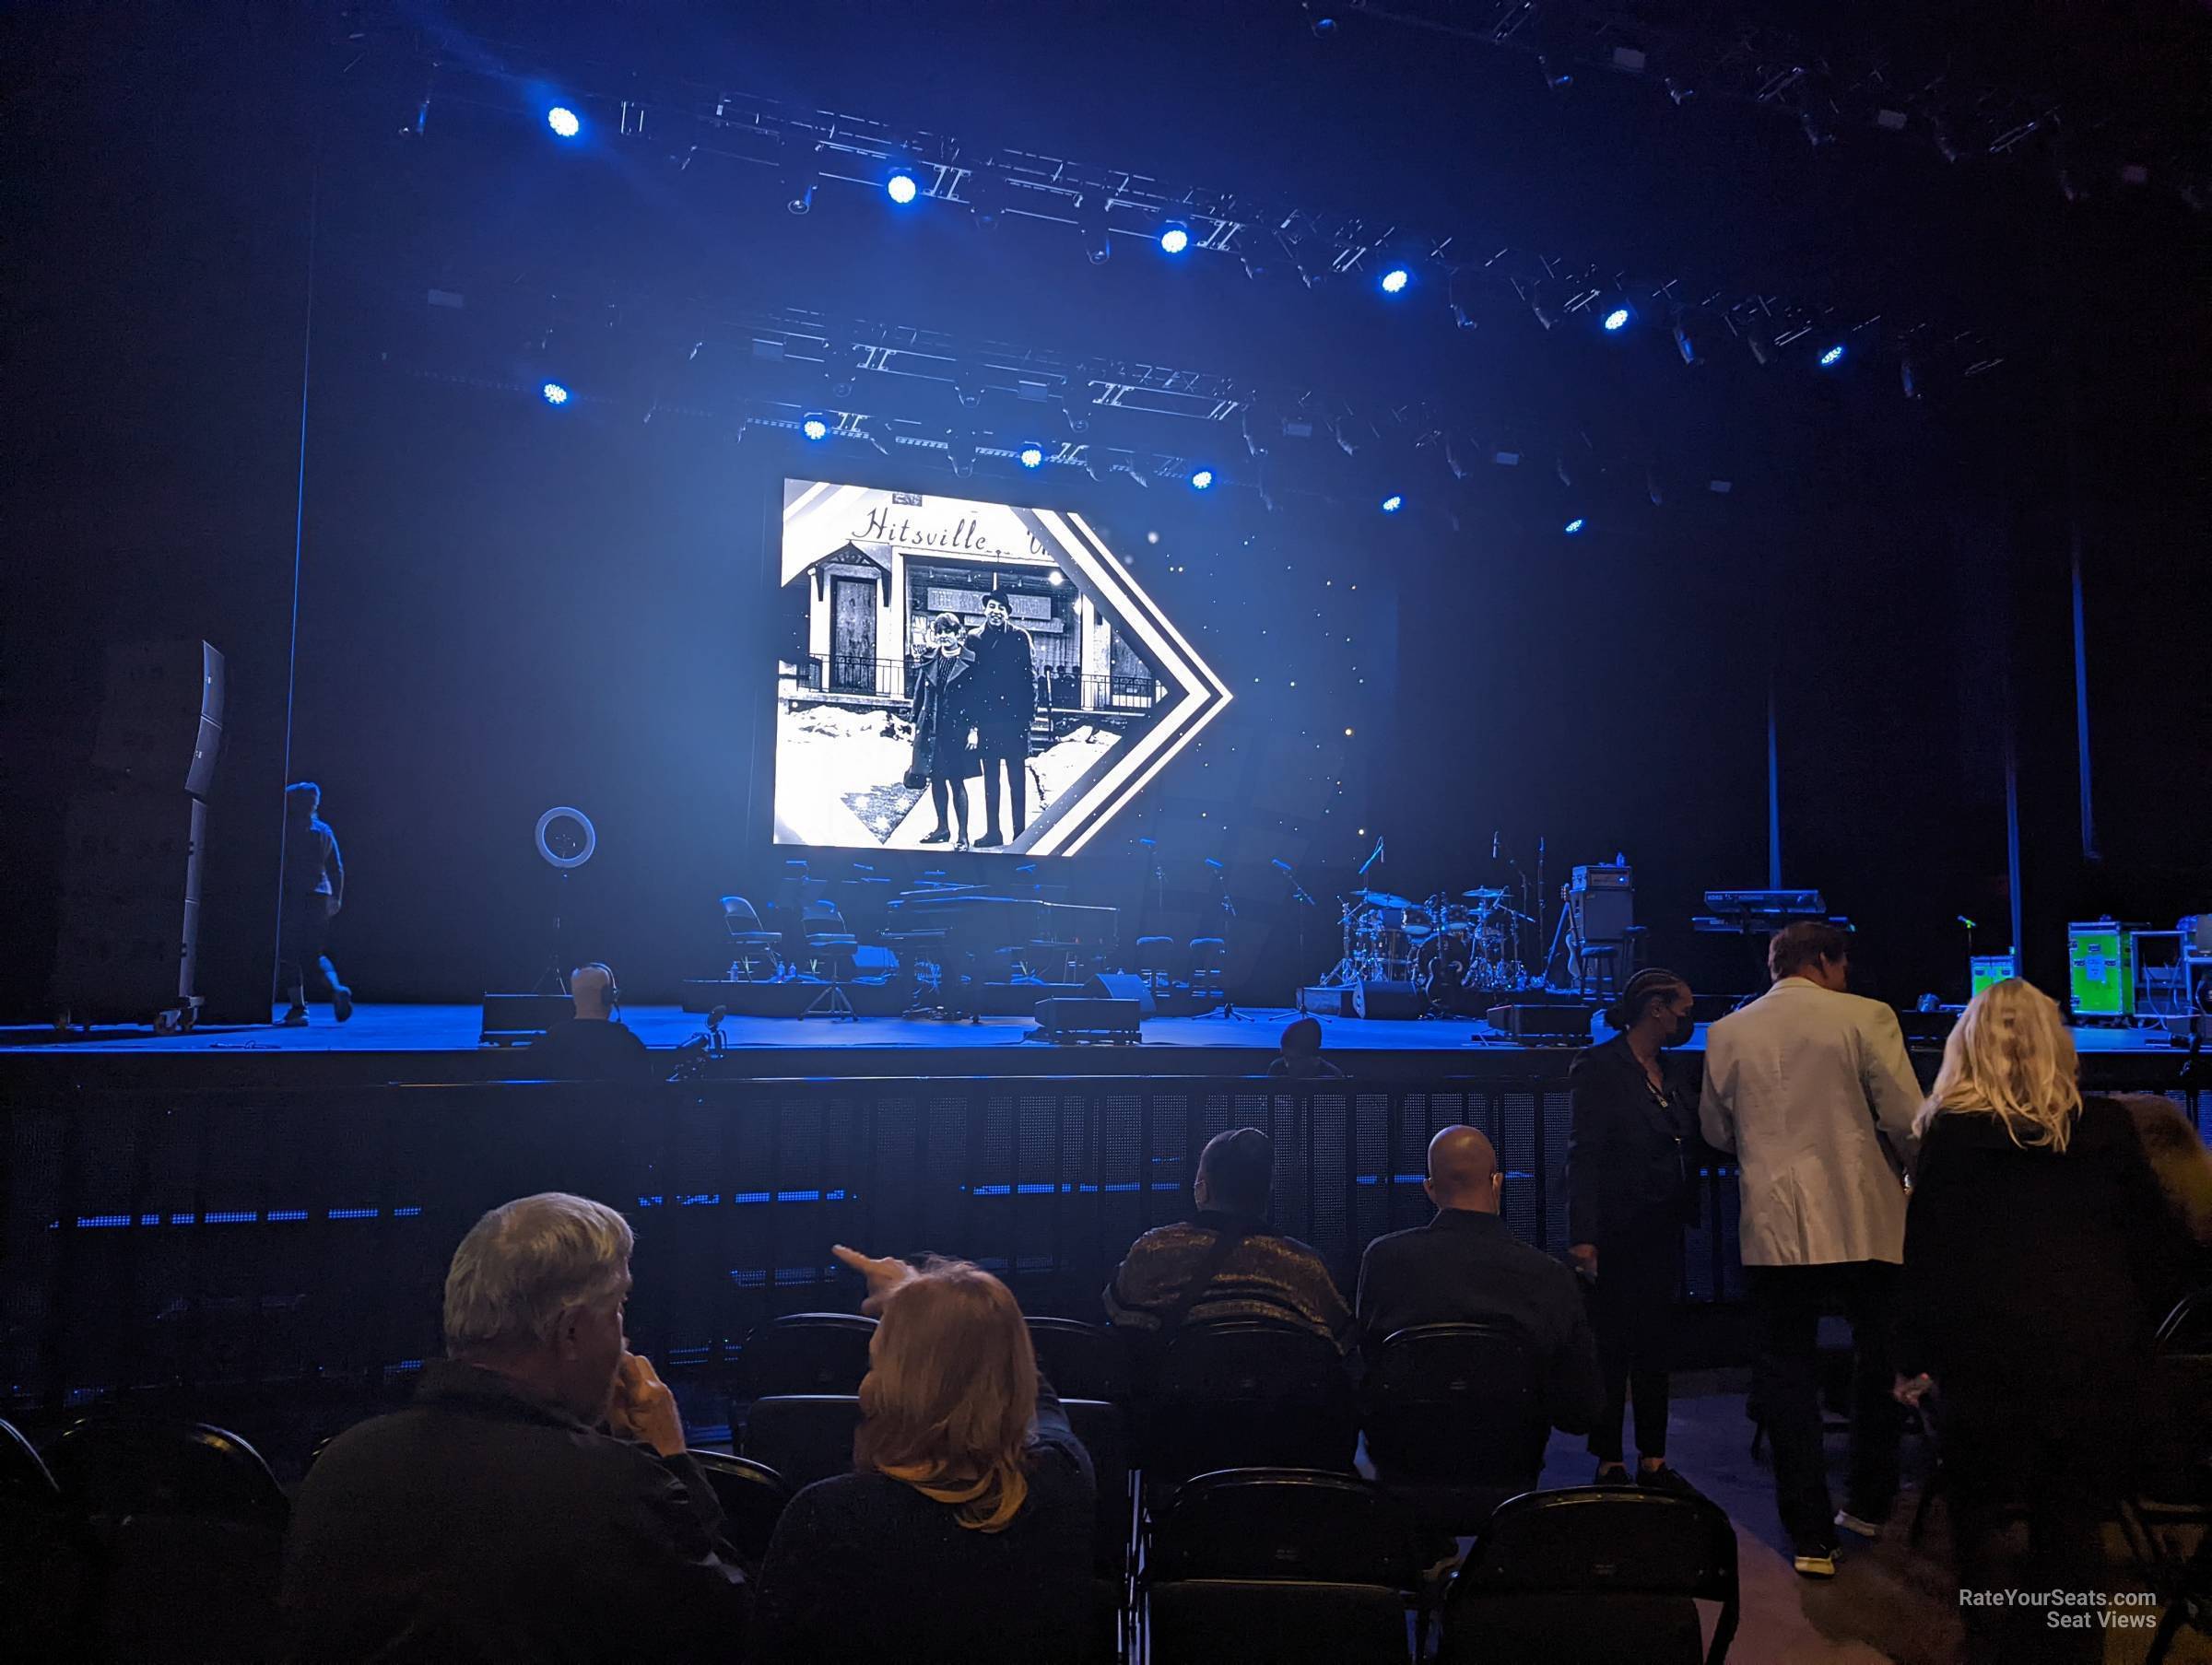 floor a, row 6 seat view  - youtube theater